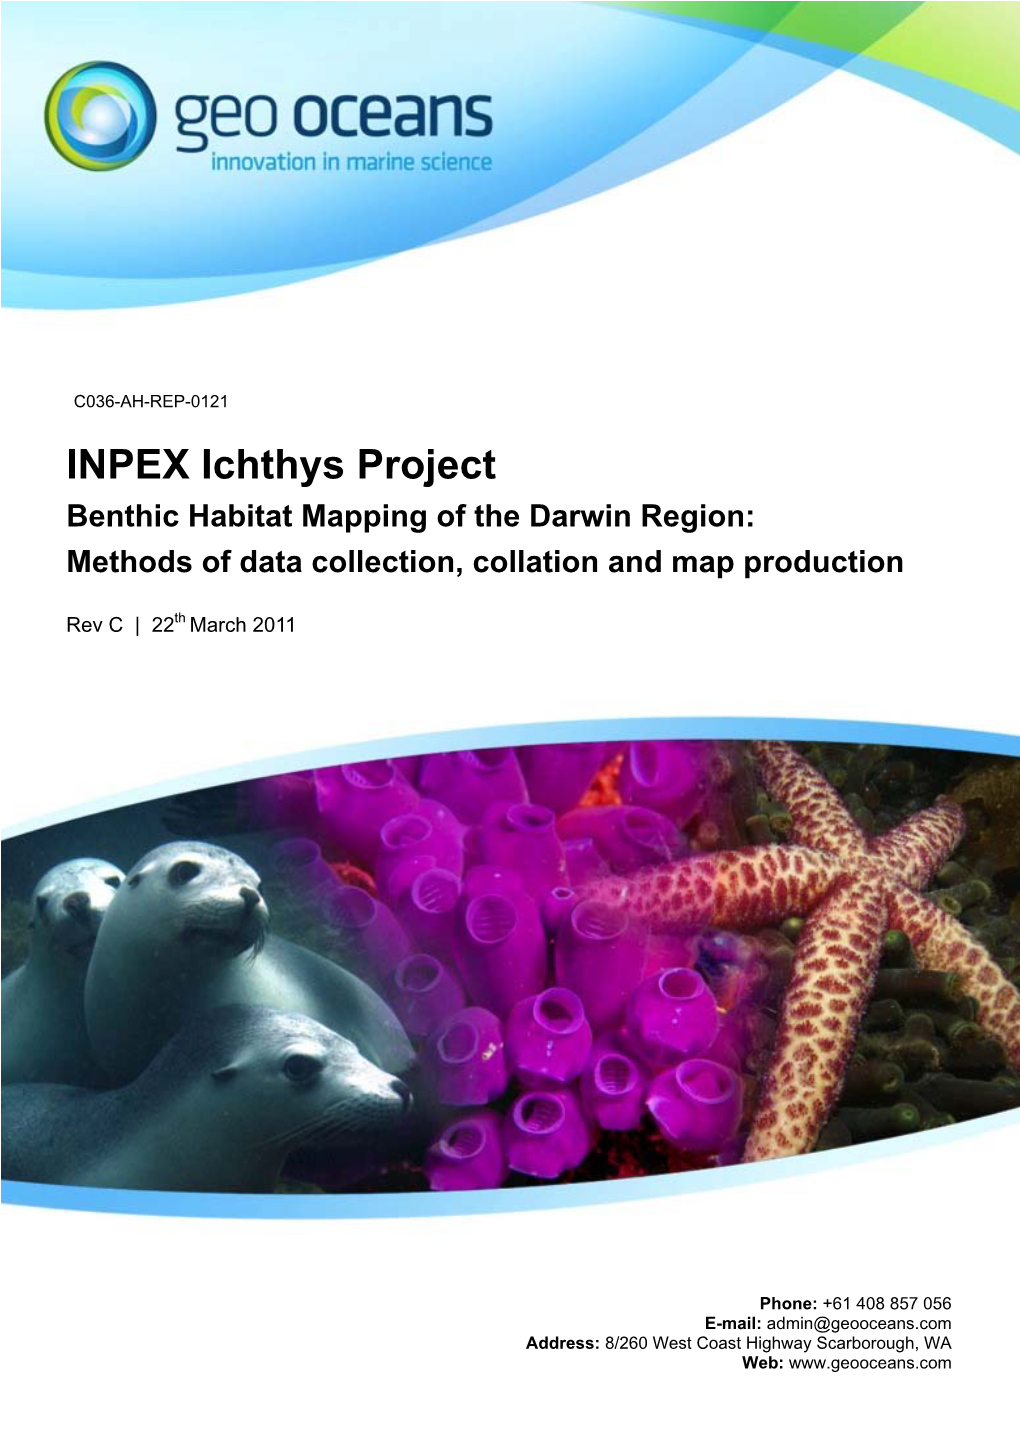 INPEX Ichthys Project Benthic Habitat Mapping of the Darwin Region: Methods of Data Collection, Collation and Map Production